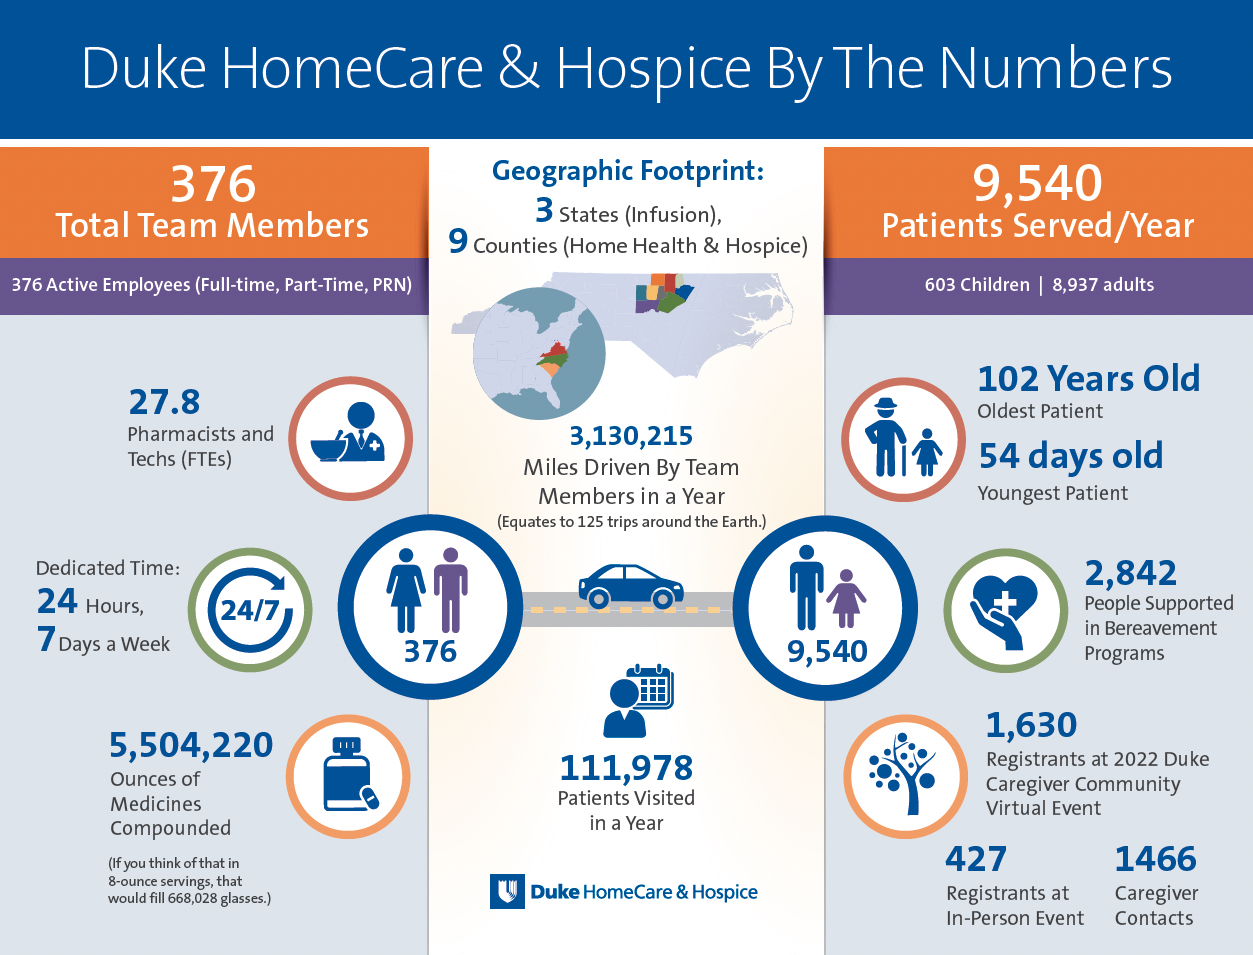 By the numbers, 376 total team members, 9540 patients served yearly